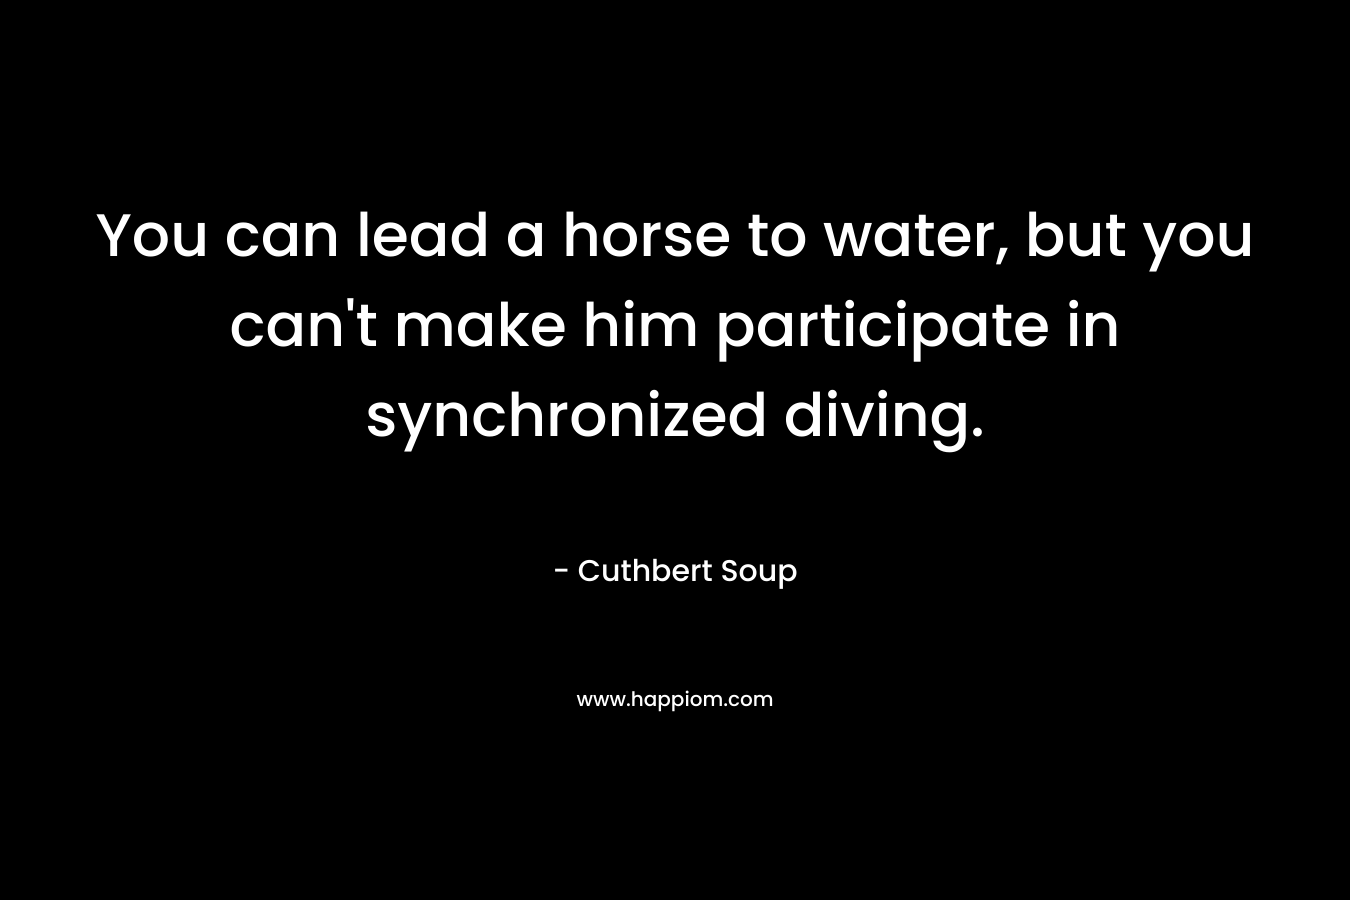 You can lead a horse to water, but you can’t make him participate in synchronized diving. – Cuthbert Soup